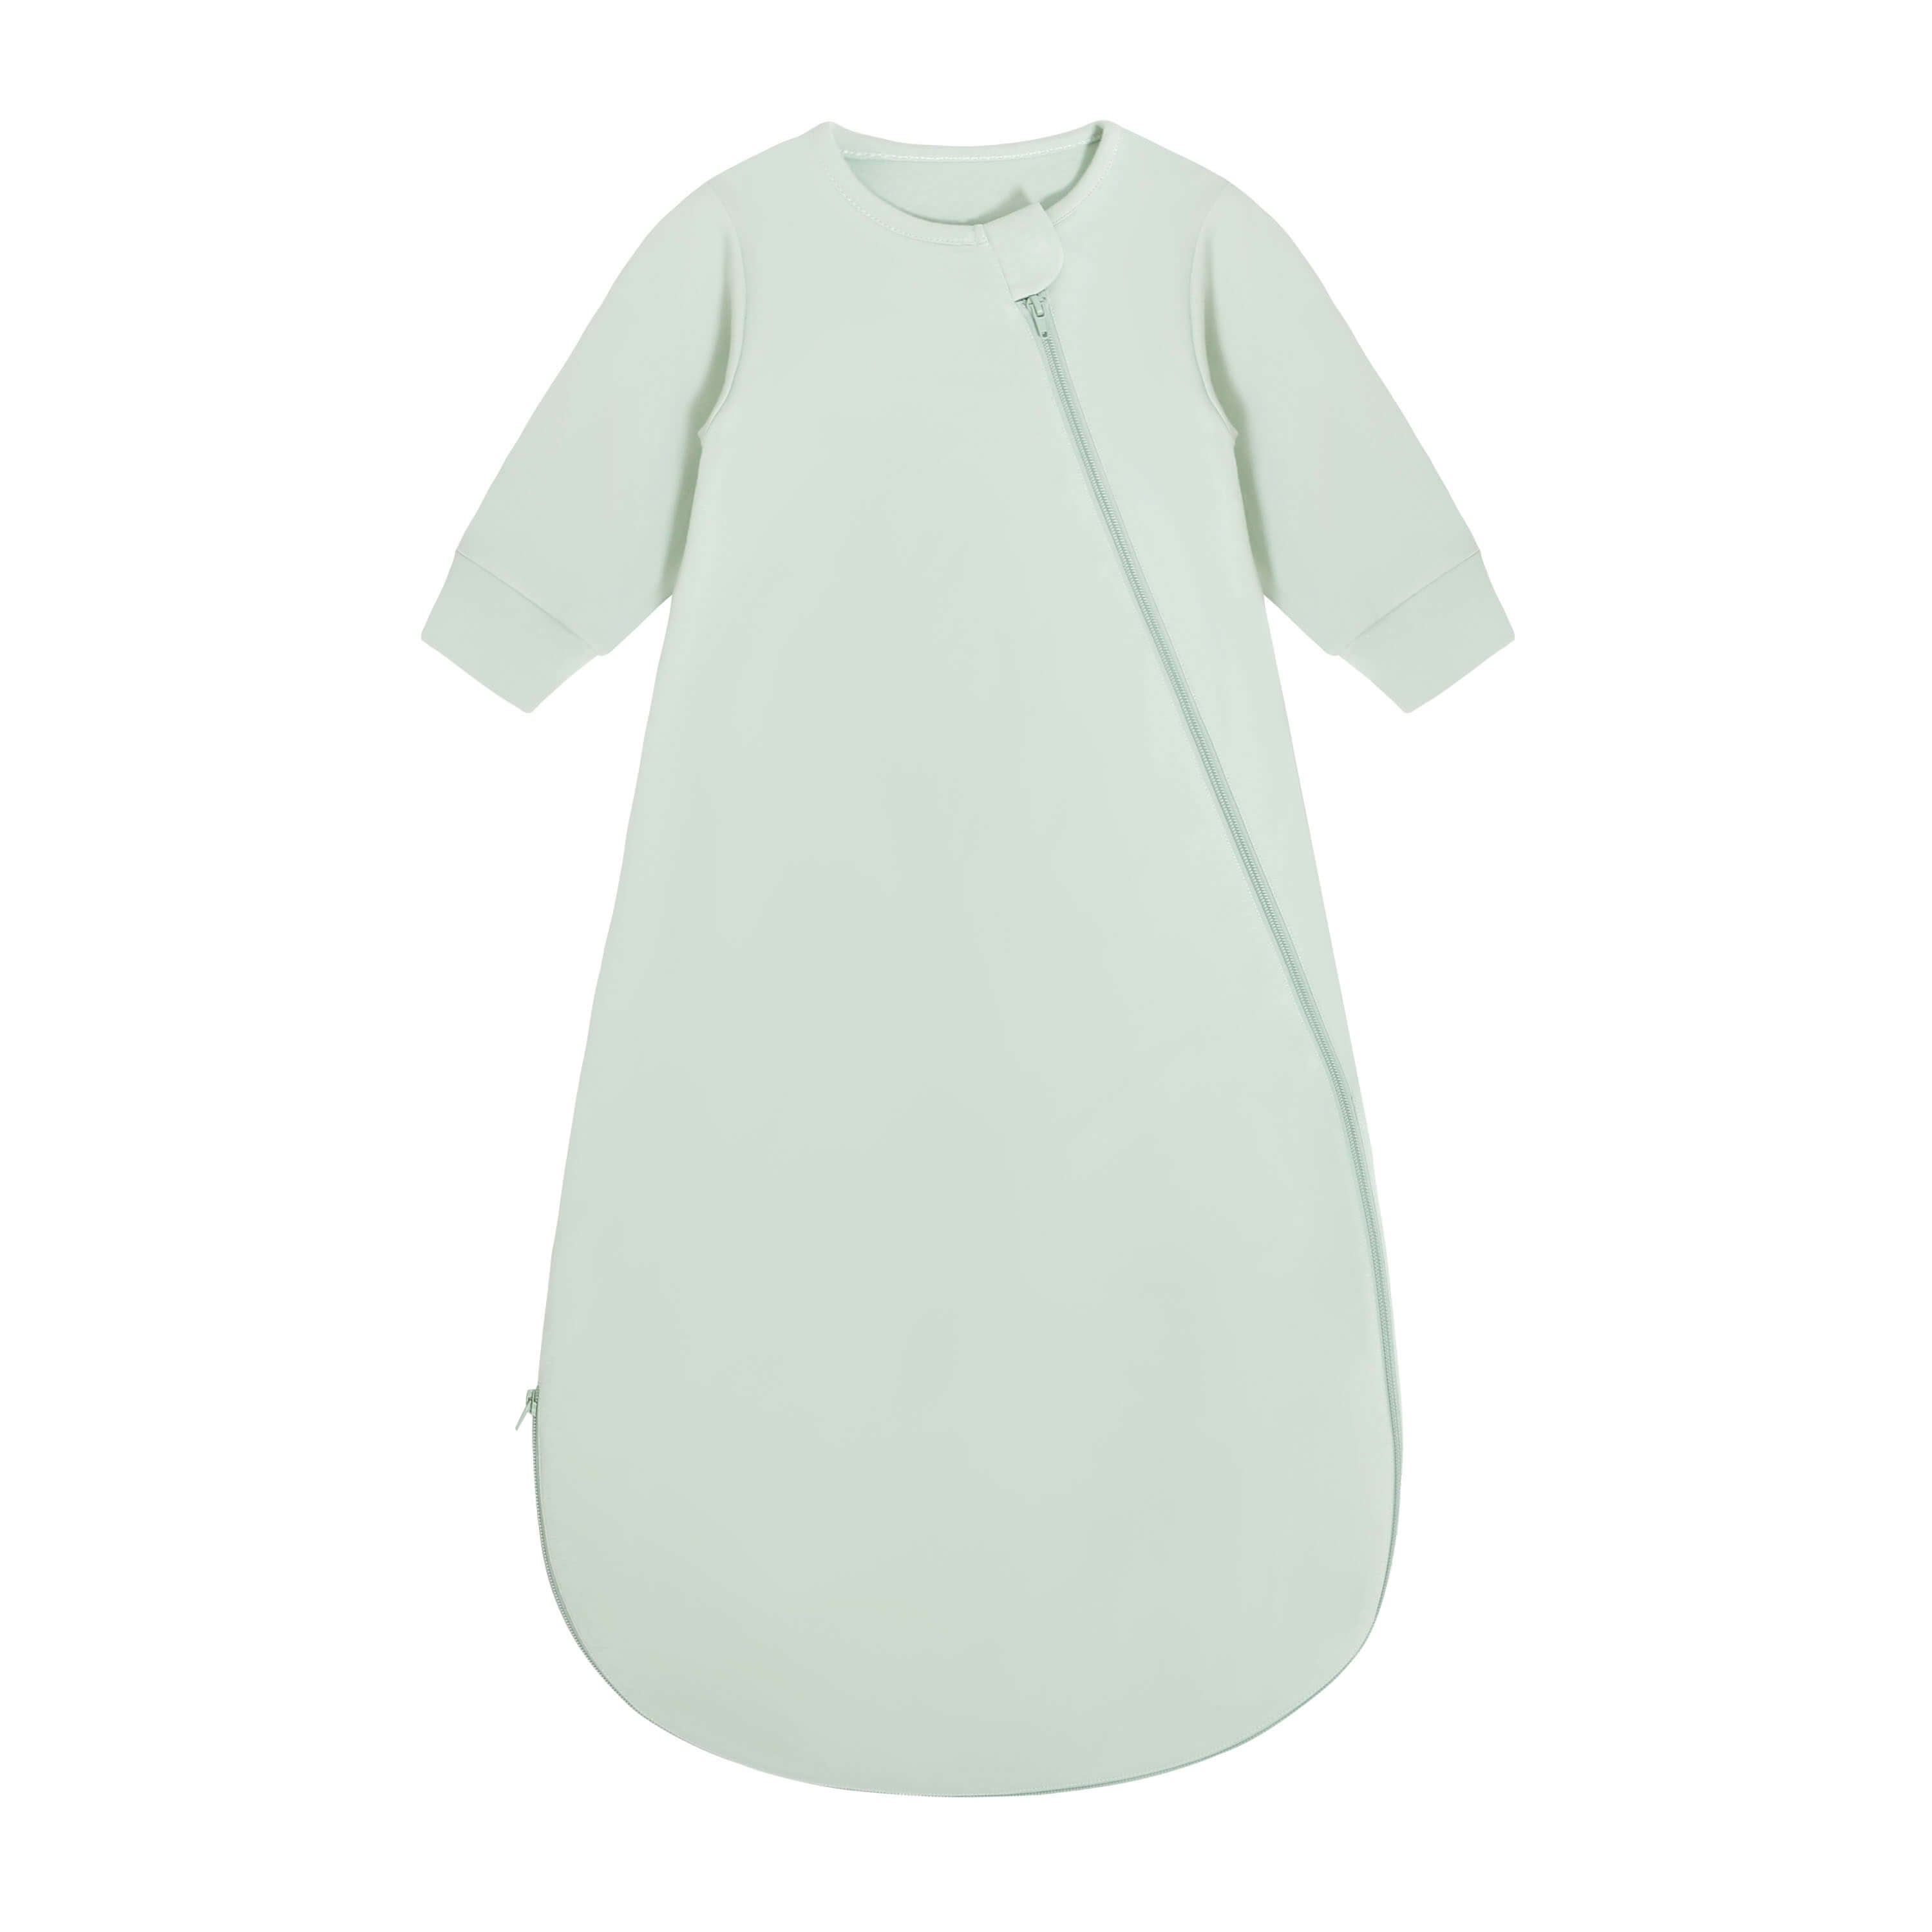 Camel Wool Winter Sleep Sack With Arms 3.5 TOG - Pea Green